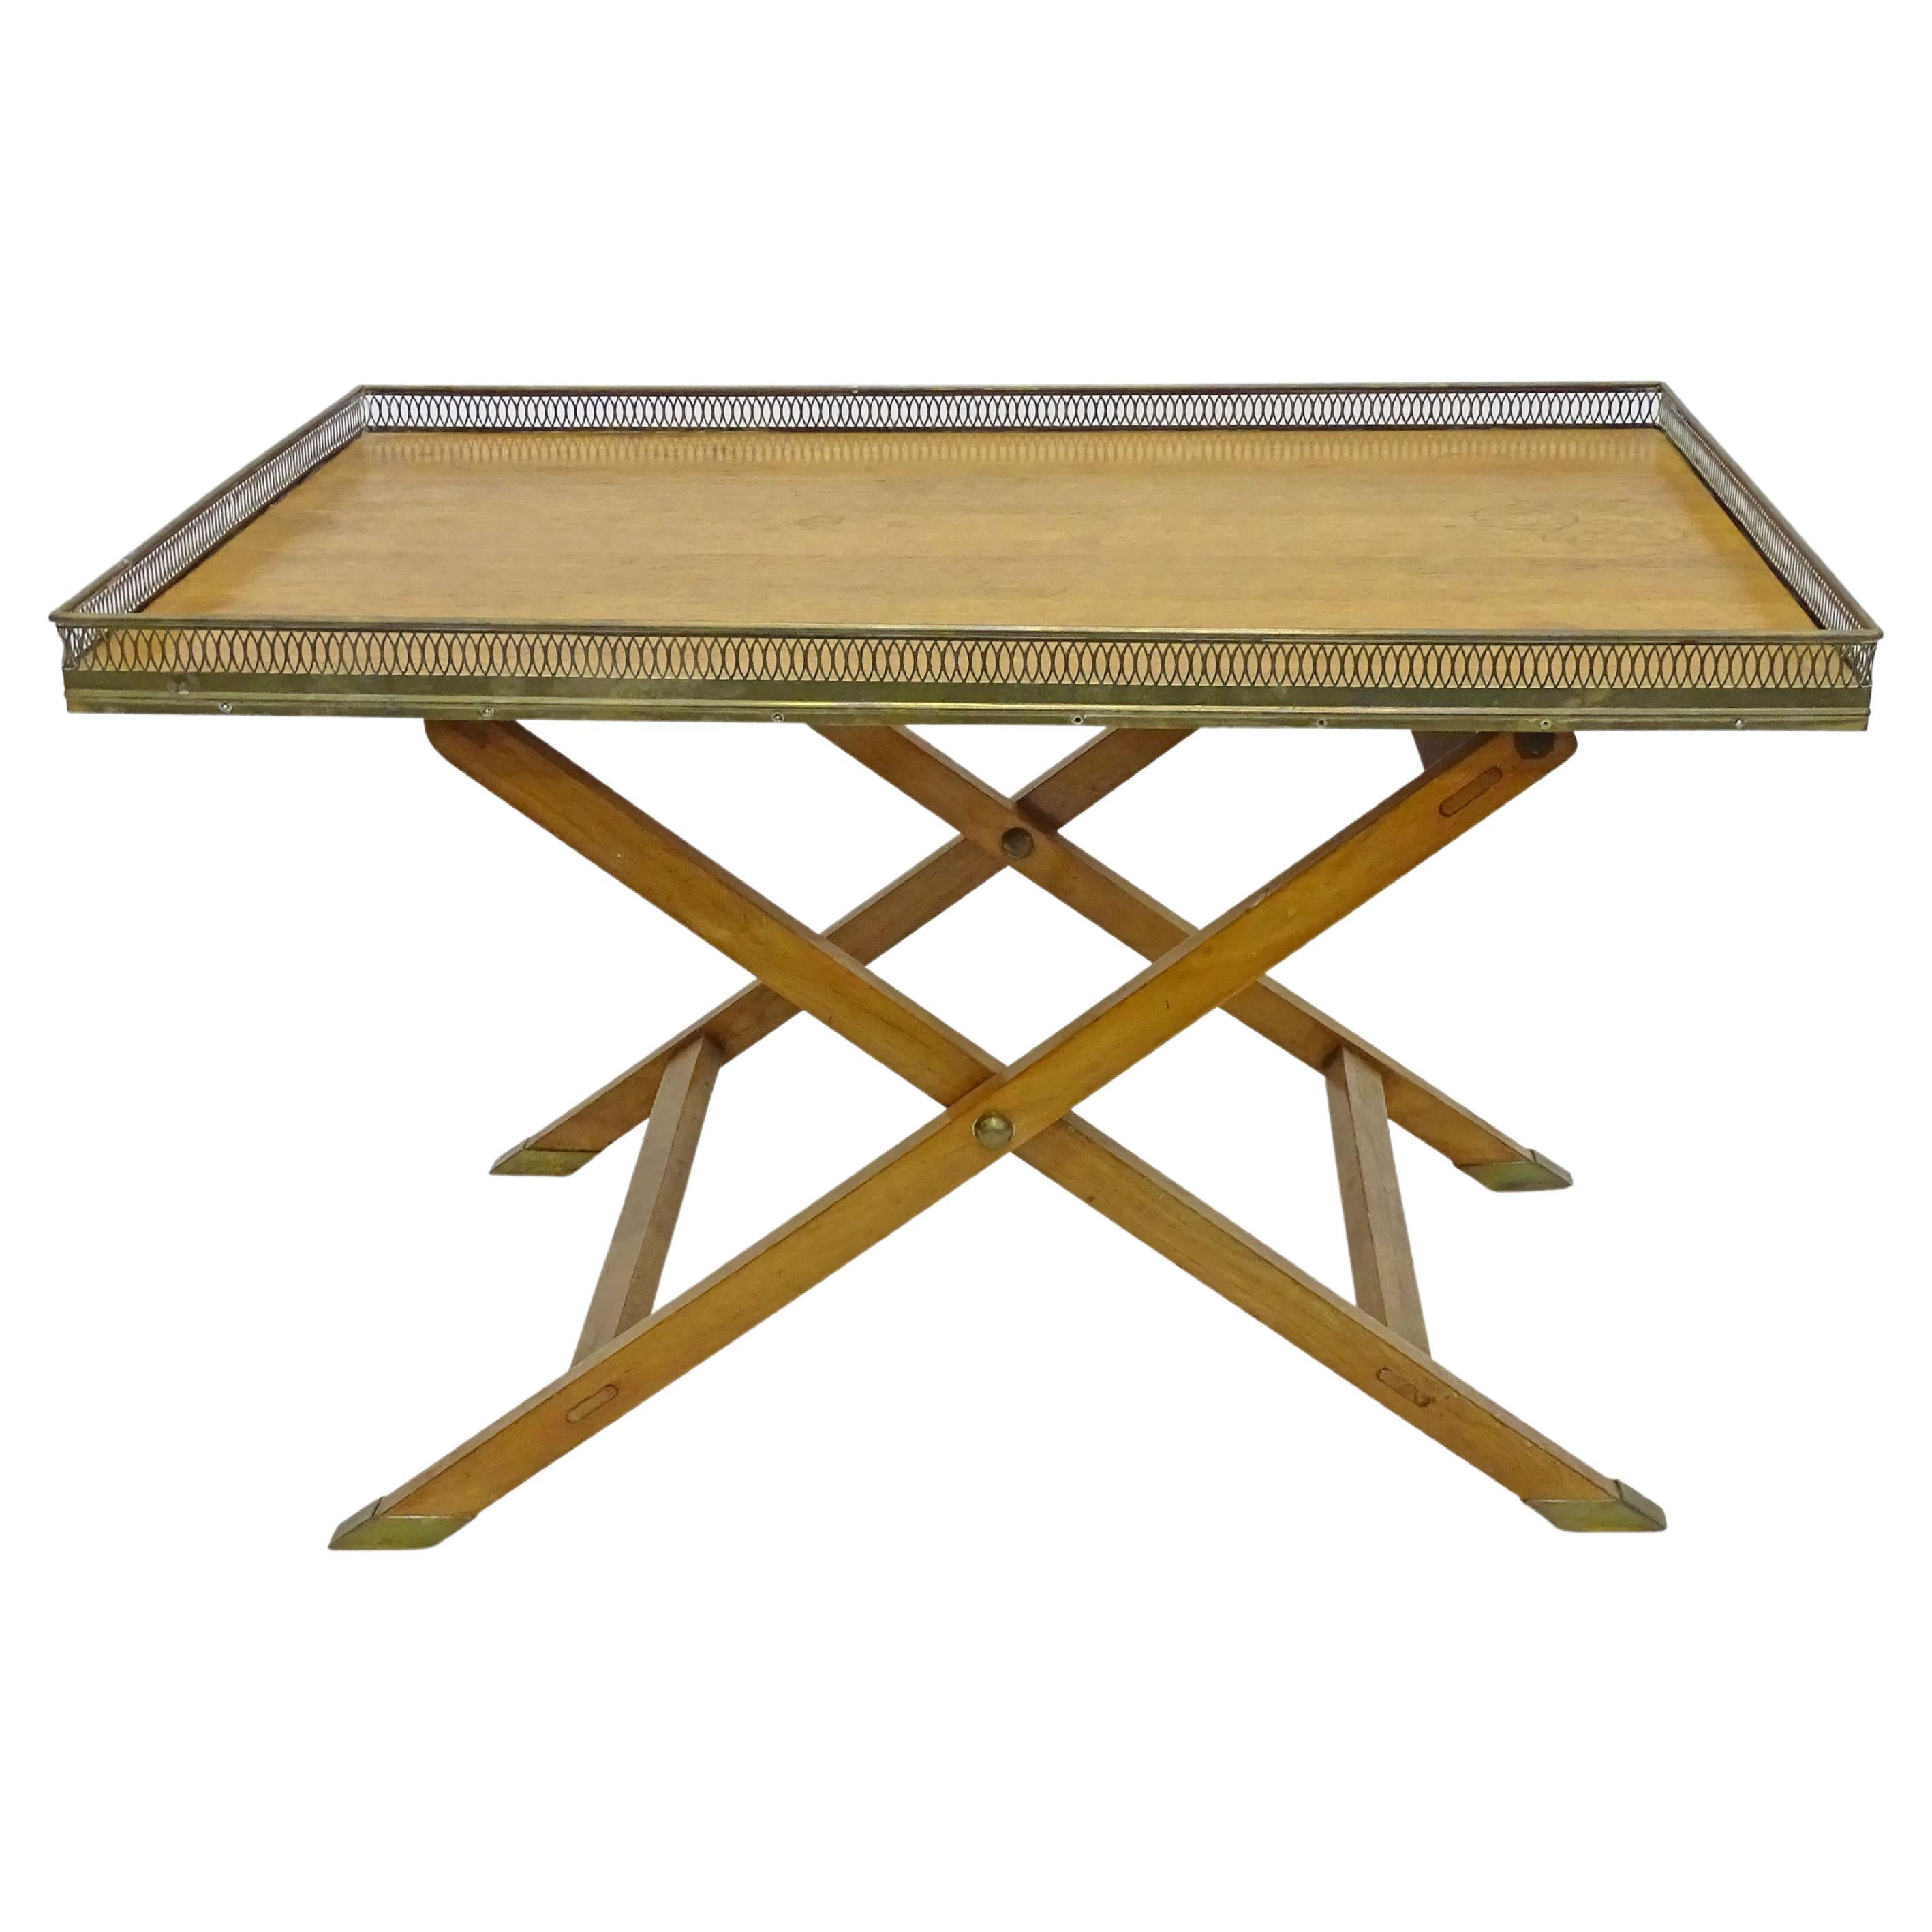 Splendid Wood and Brass Folding Coffee Table, 1950s For Sale